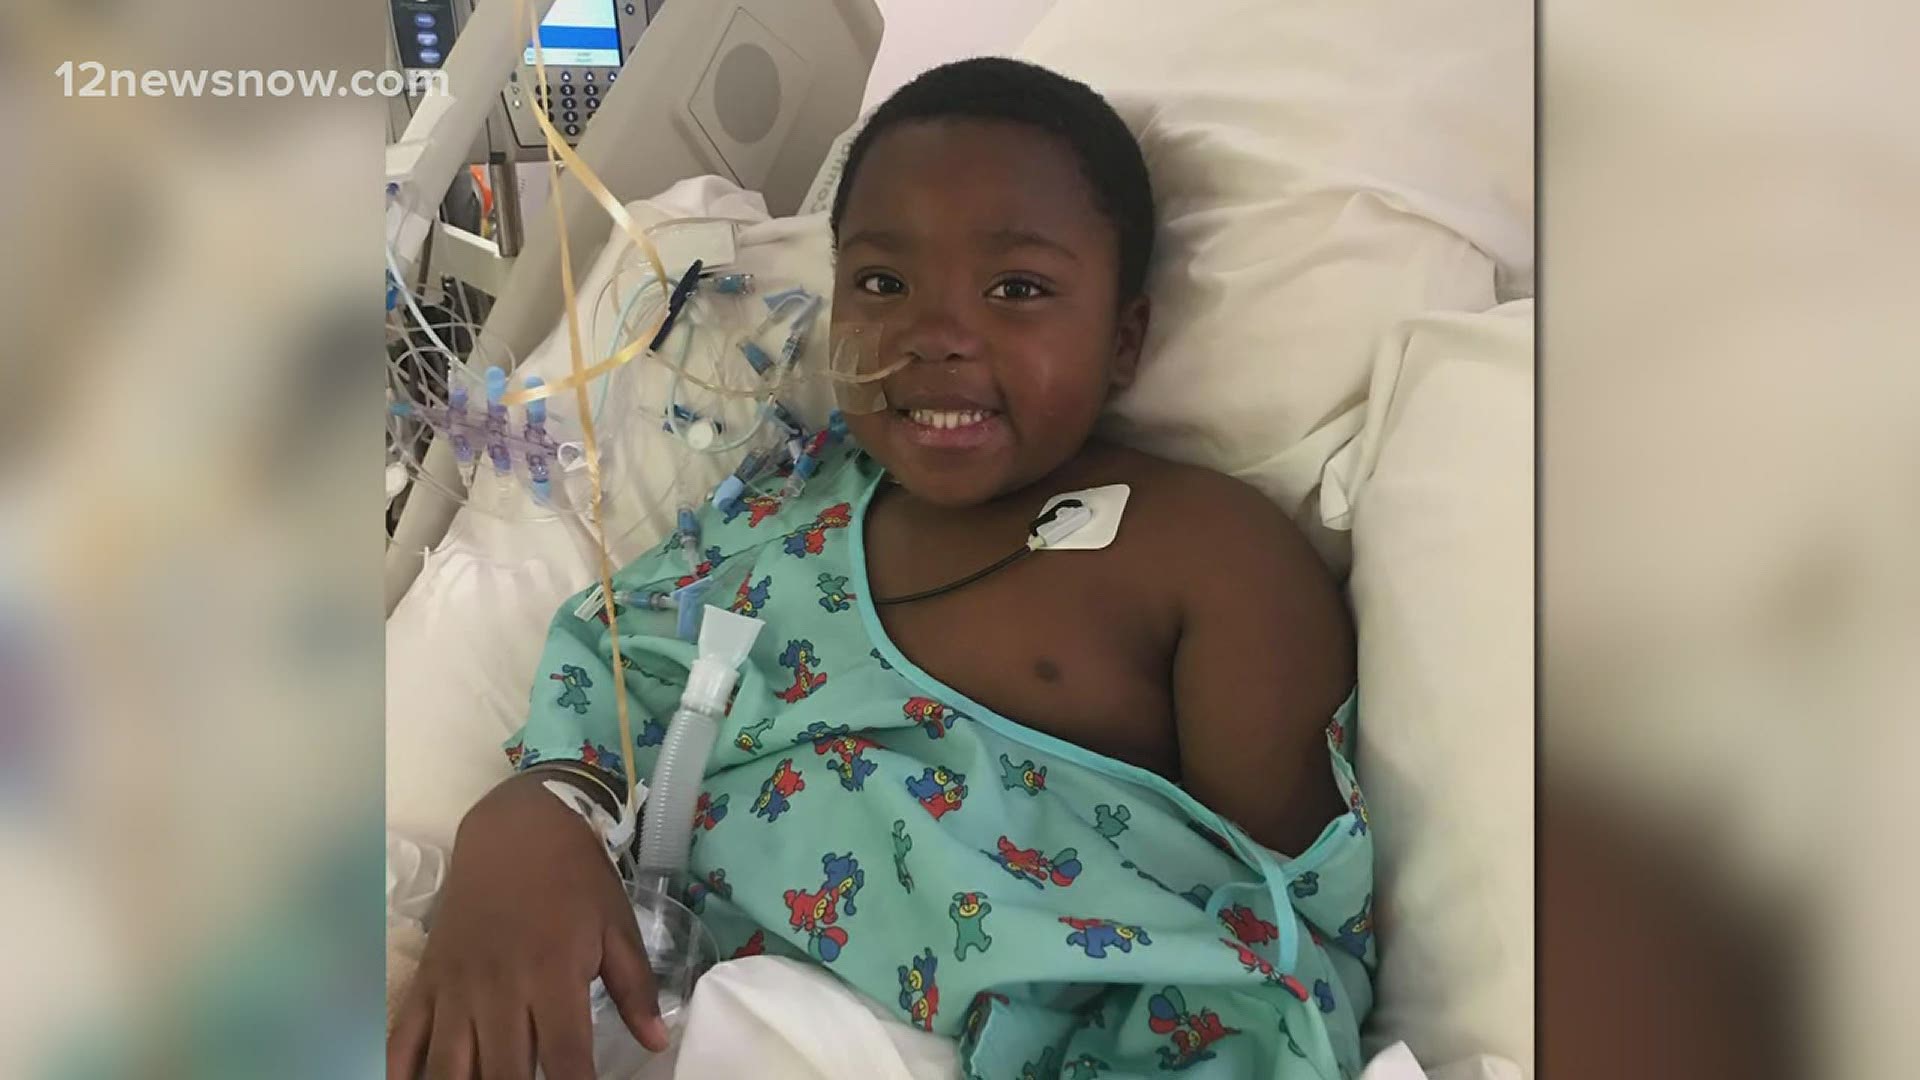 7-year-old recovering from battle with COVID-19 after 12 days on